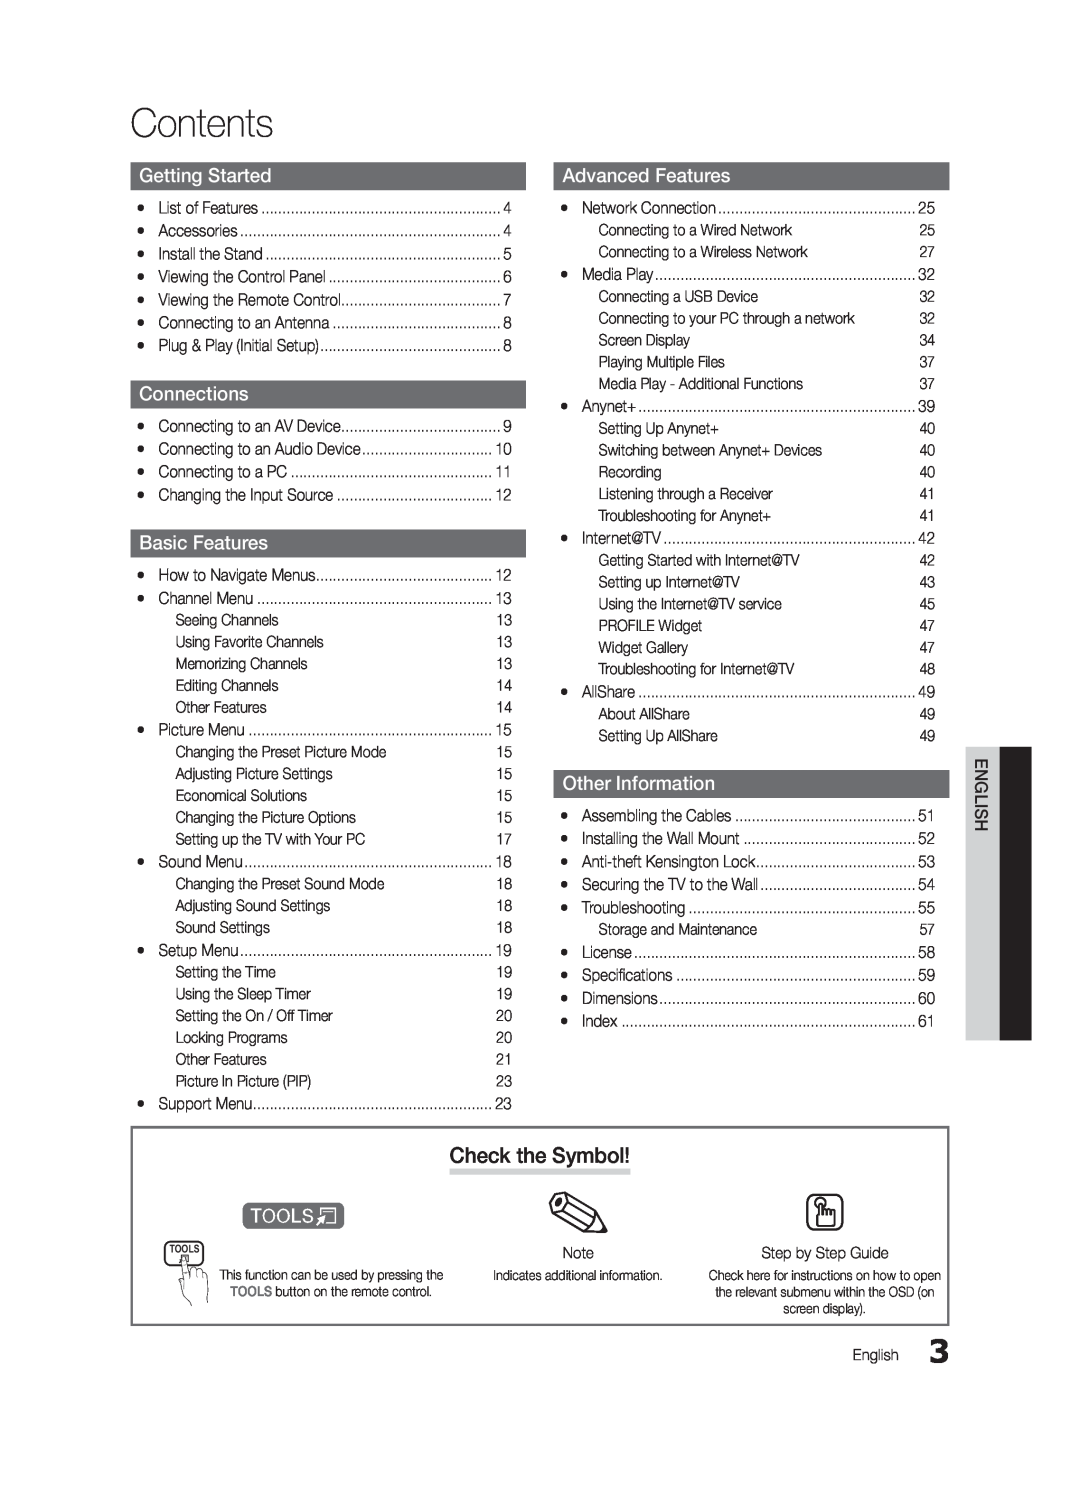 Samsung 6800 user manual Contents, Check the Symbol, Getting Started, Connections, Advanced Features, Basic Features 